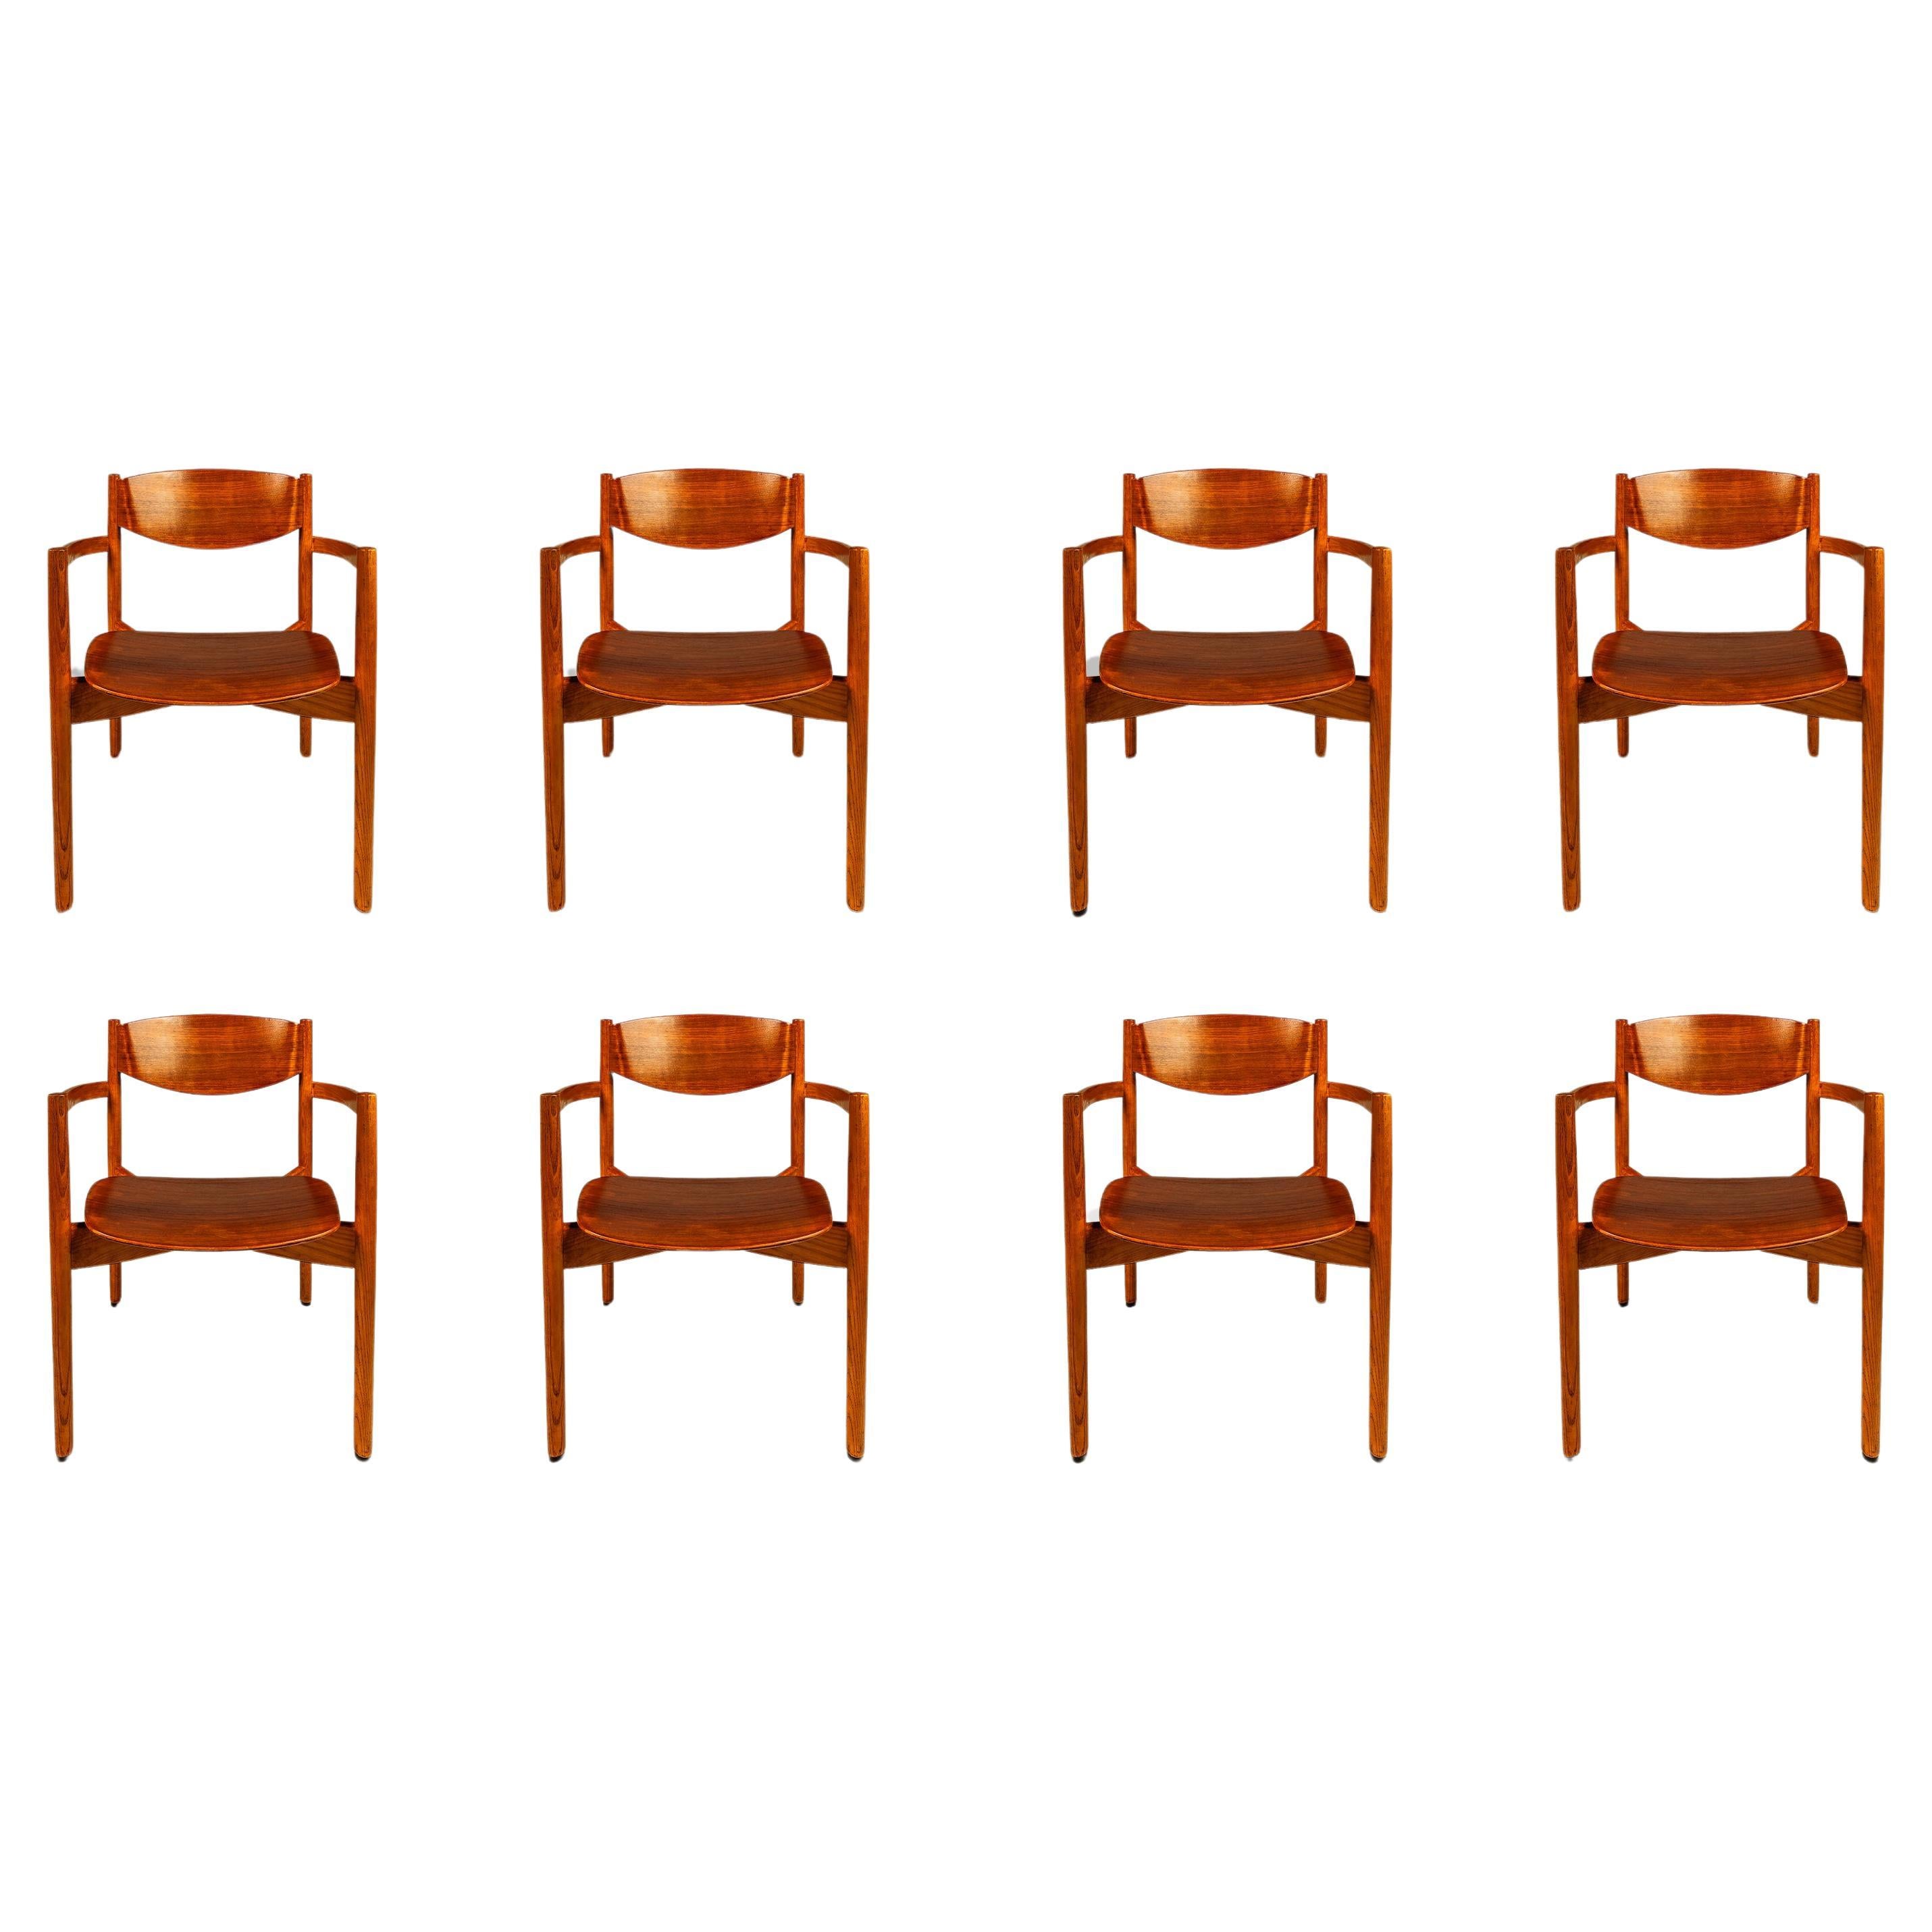 Set of 8 Mid-Century Stacking Chairs: Oak & Walnut, Jens Risom Design, USA, 1960 For Sale